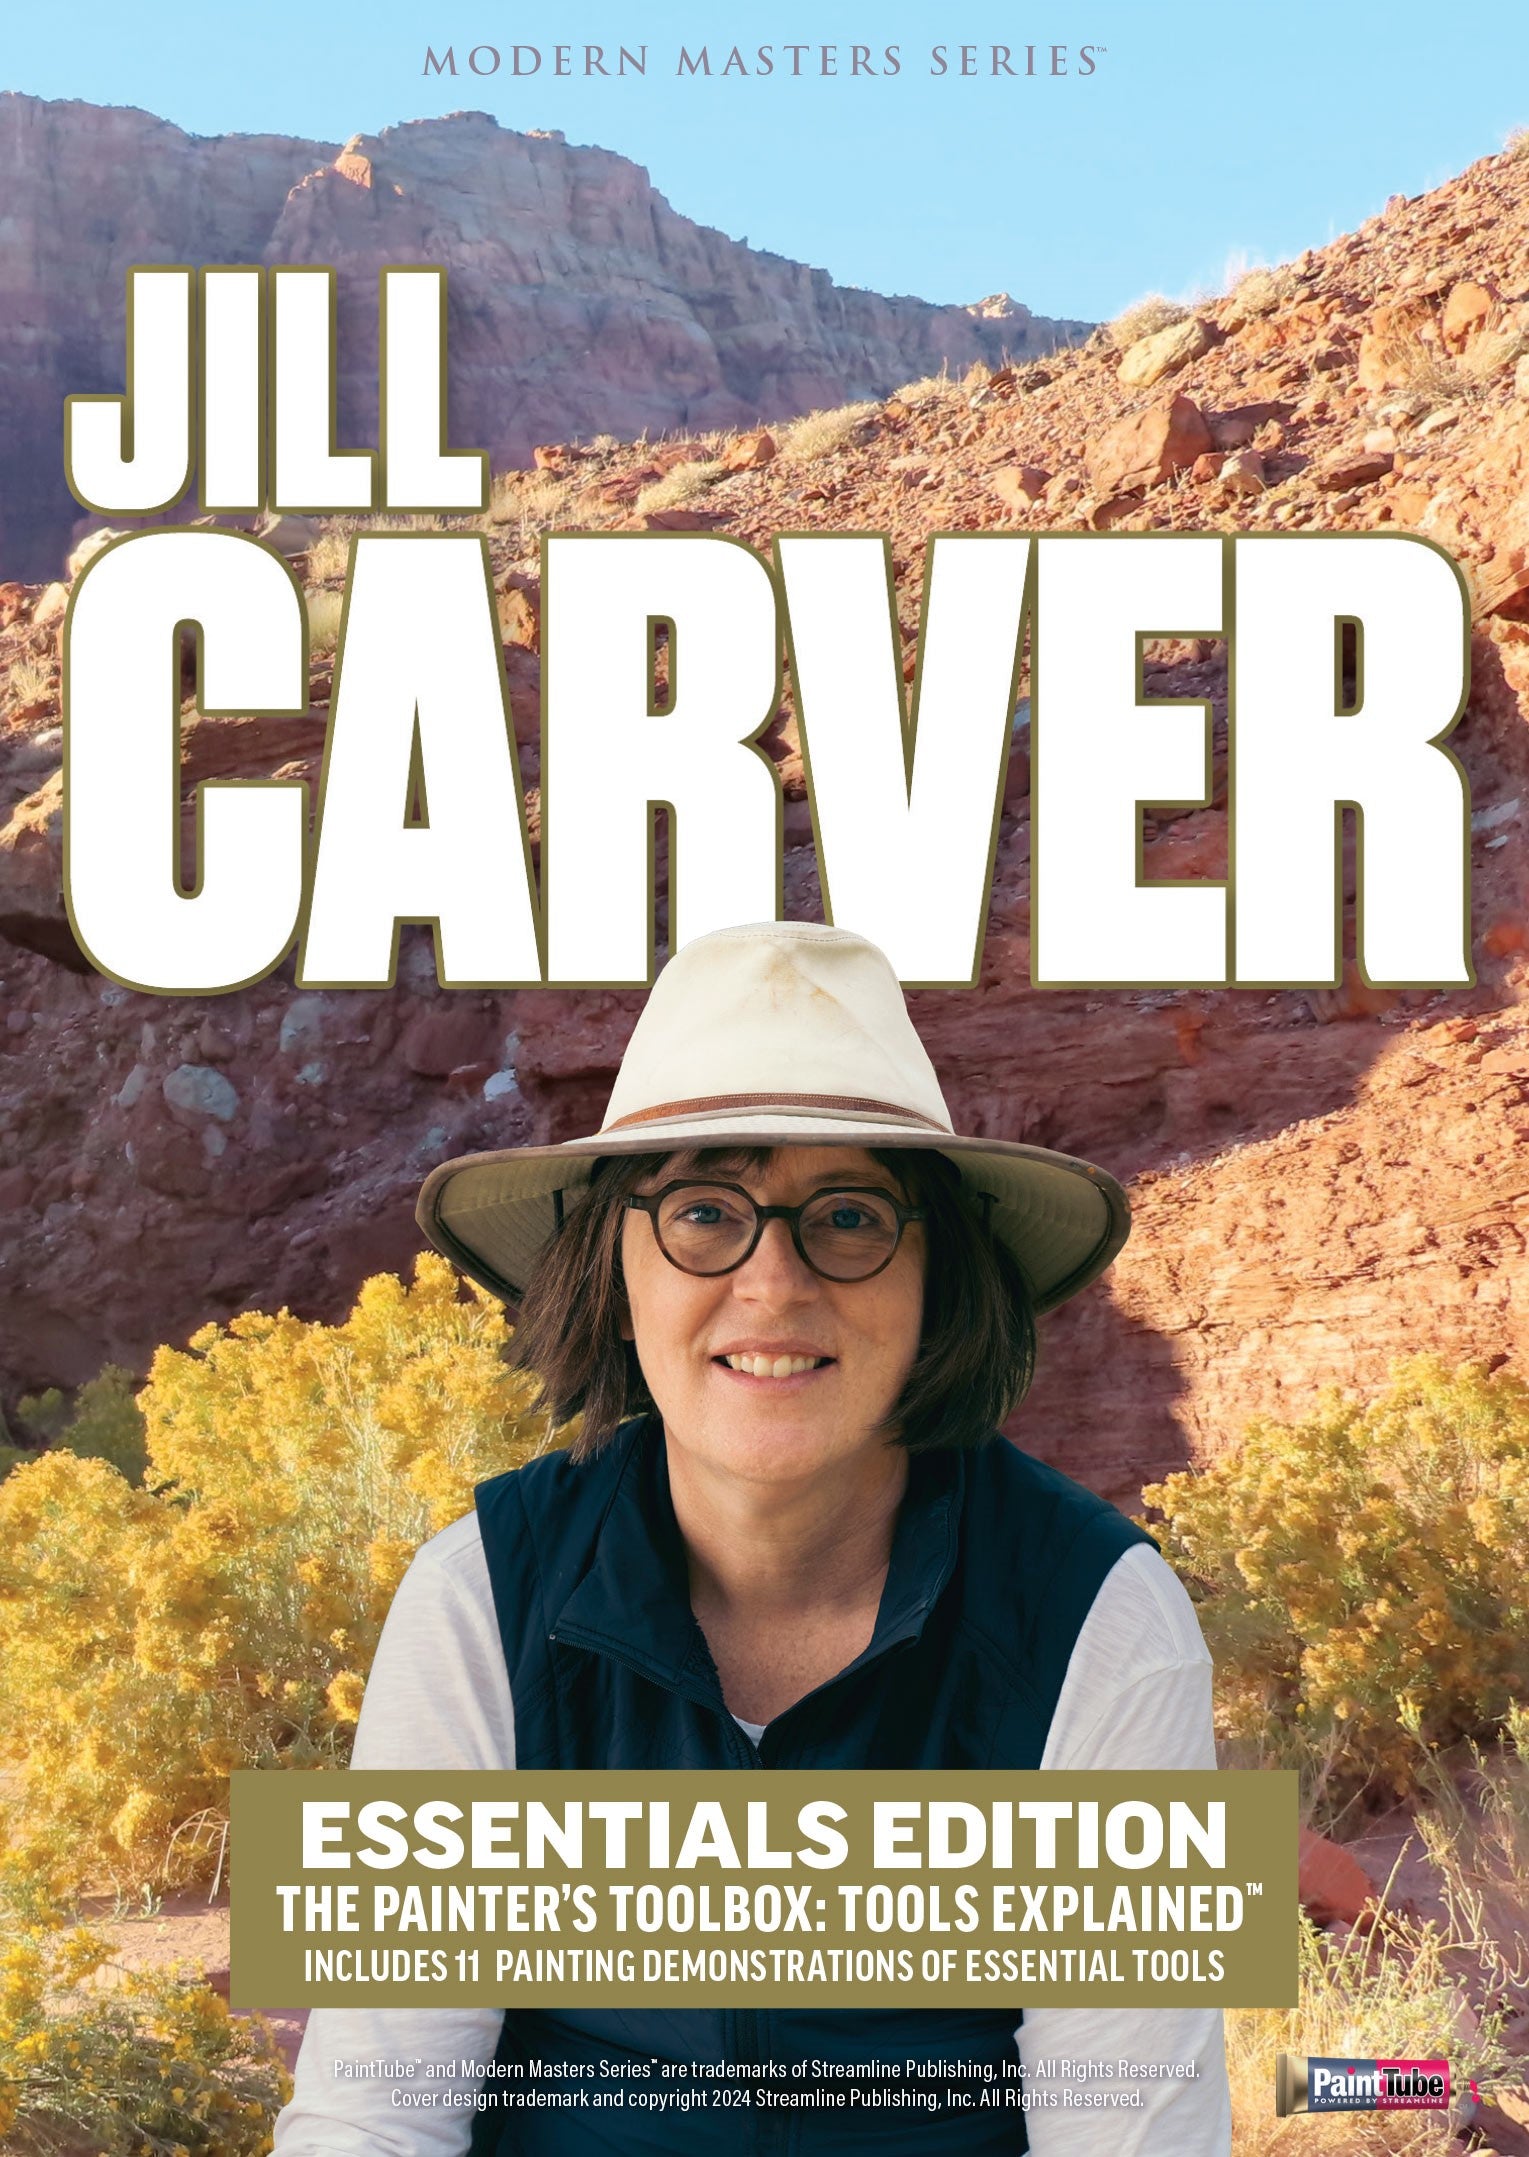 JILL CARVER: THE PAINTER'S TOOLBOX — ESSENTIALS EDITION — TOOLS EXPLAINED